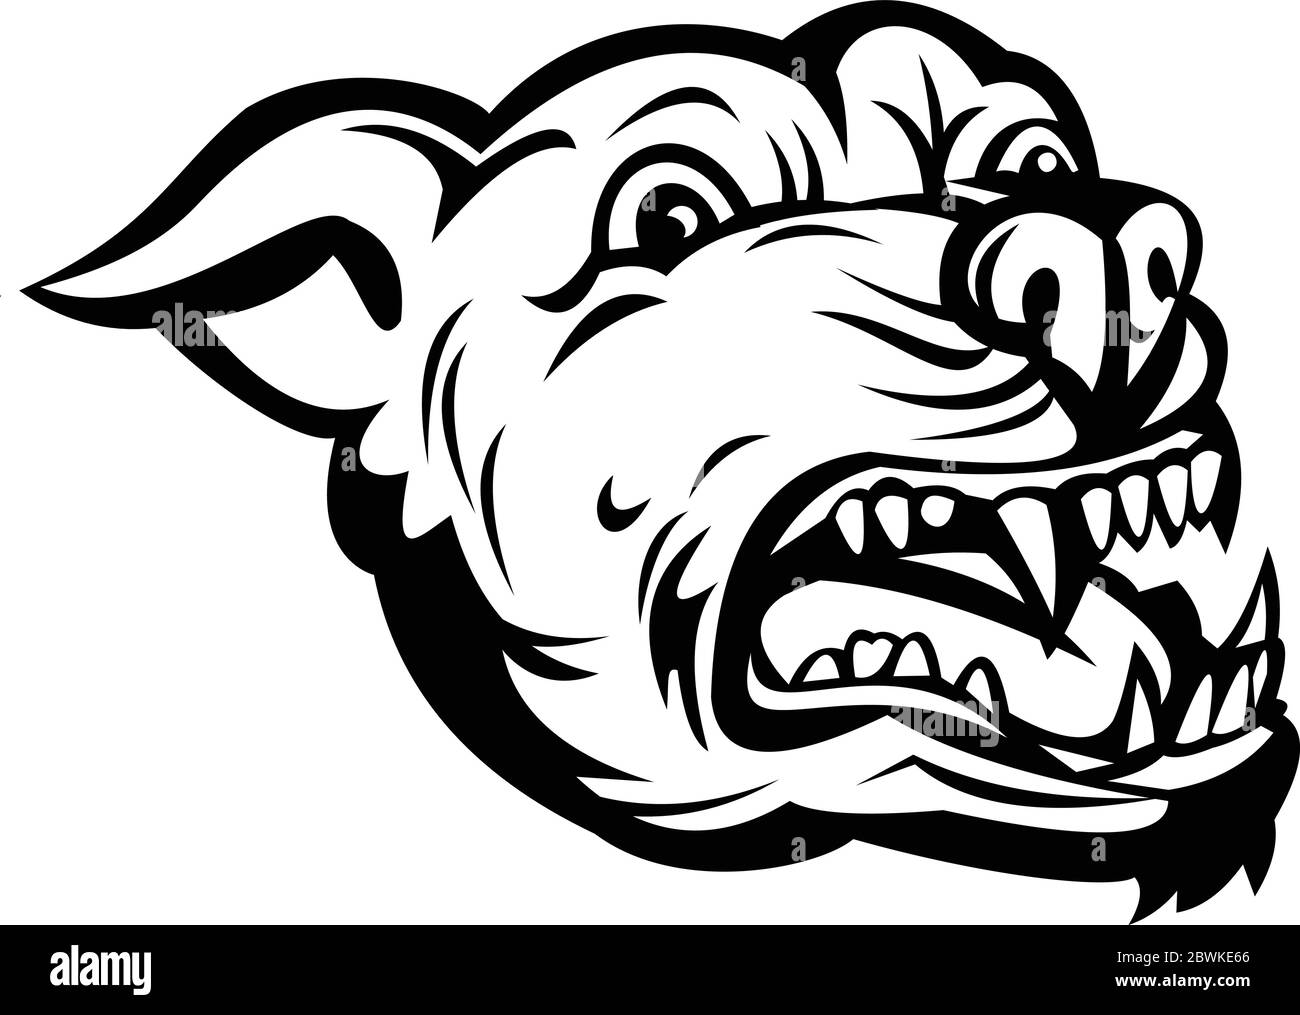 Pitbull angry Stock Vector Images - Alamy